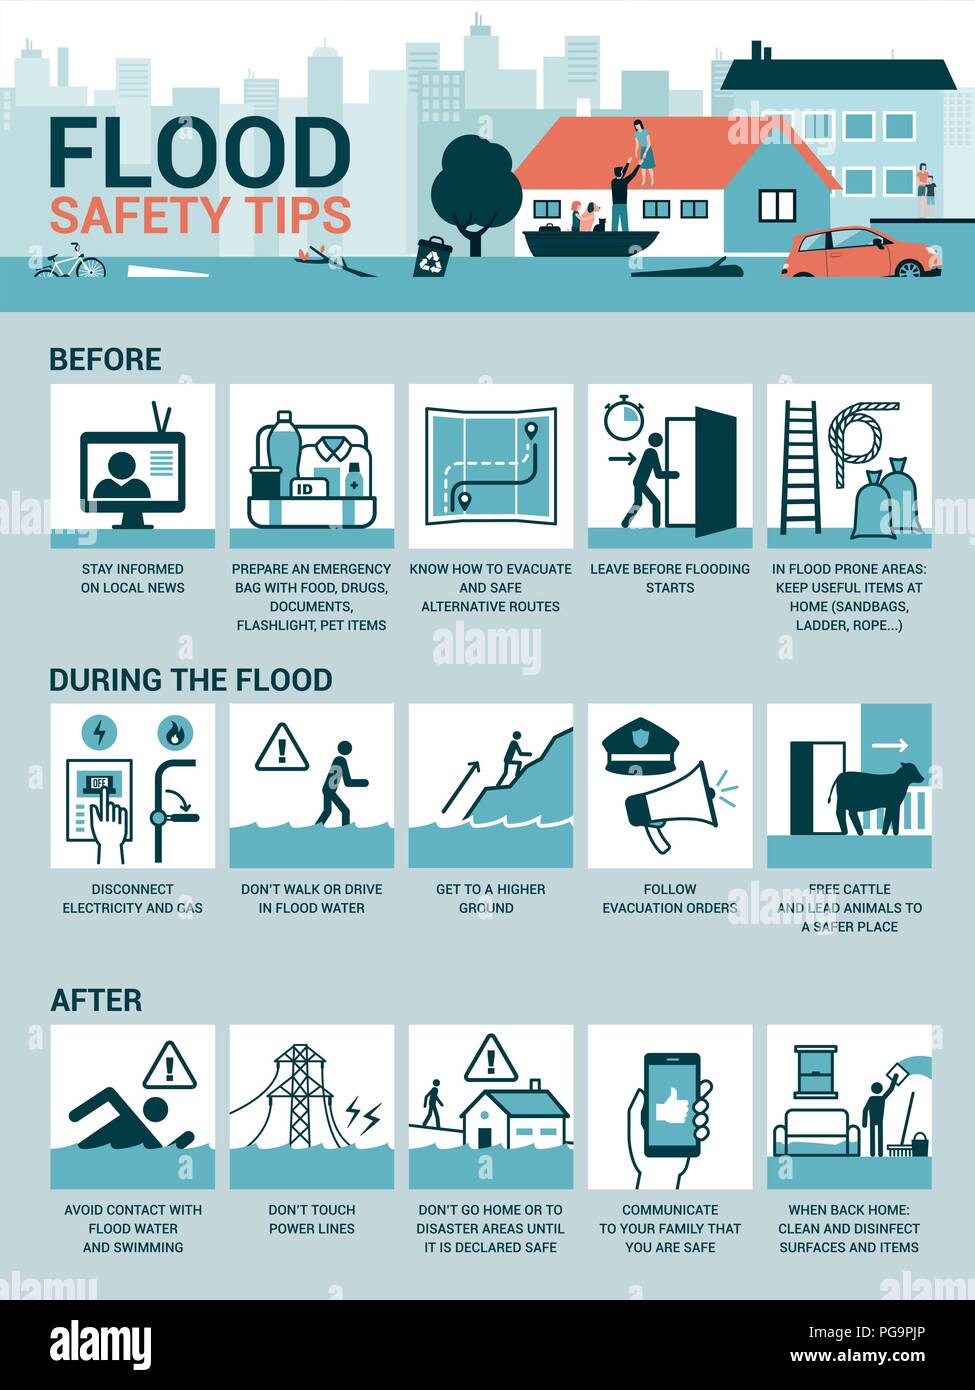 Flood Safety Tips And Preparation Before During And After The